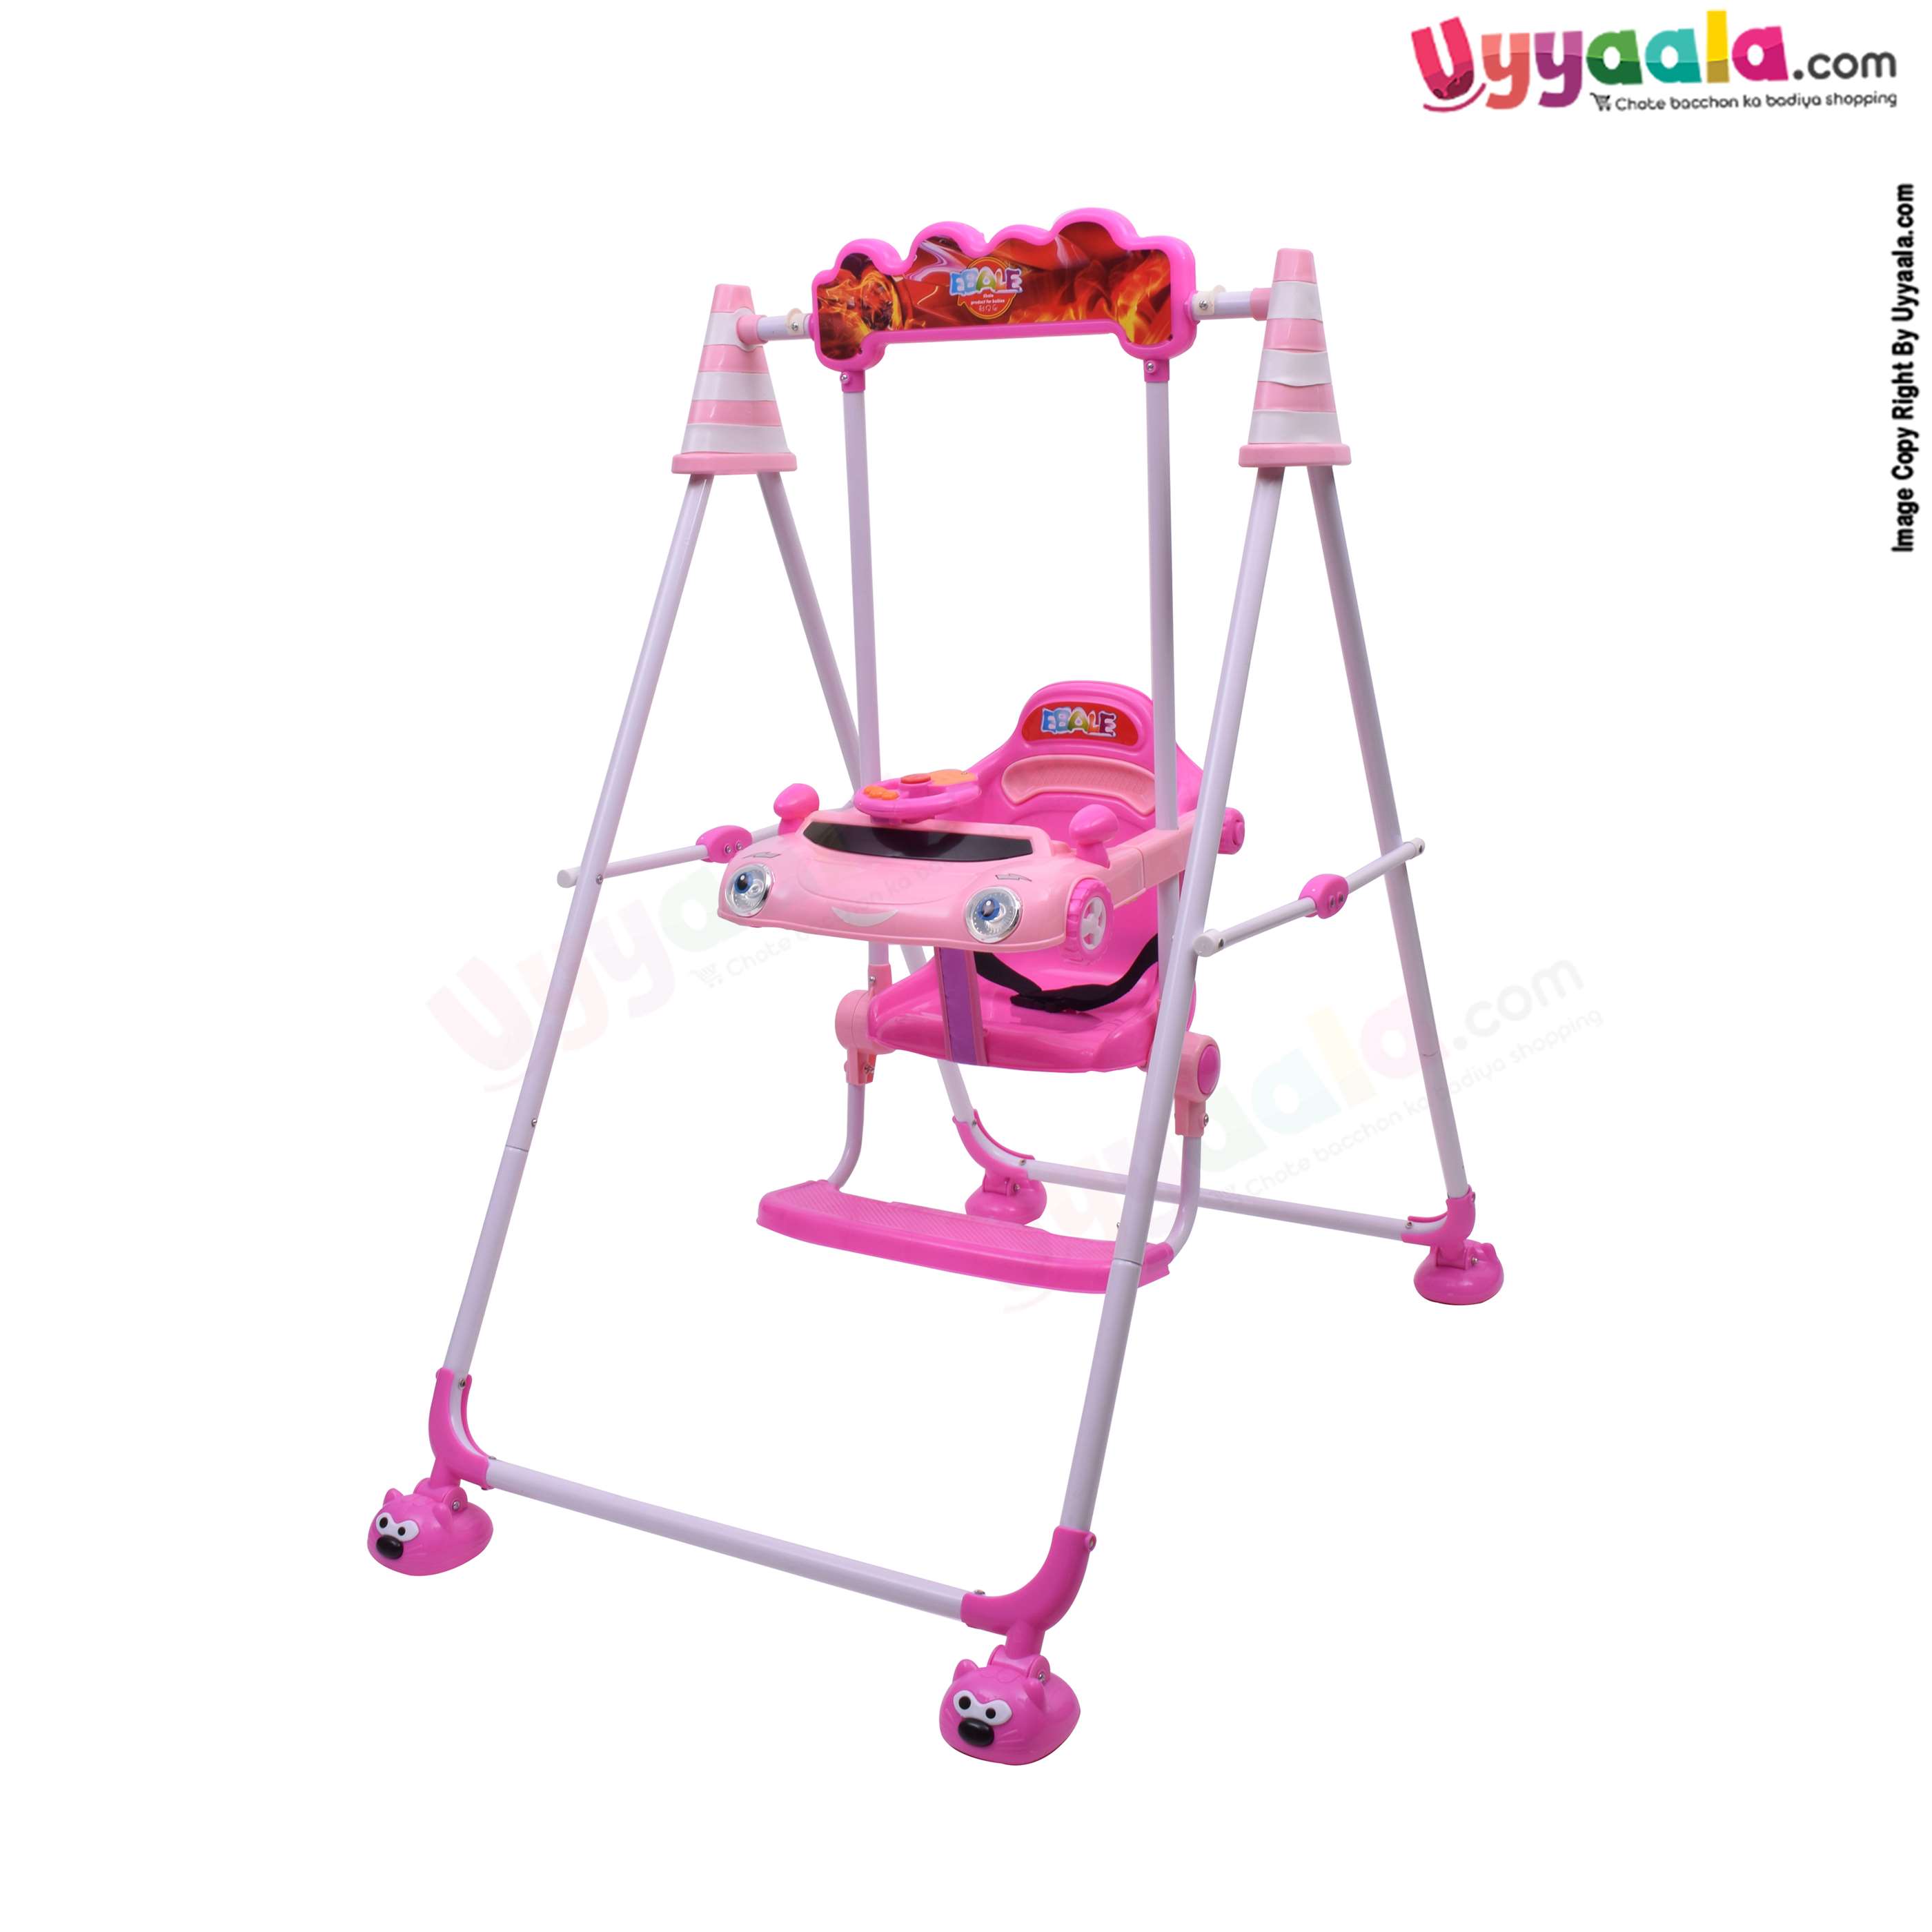 EBALE Garden swing with music for babies - 6 + months, pink